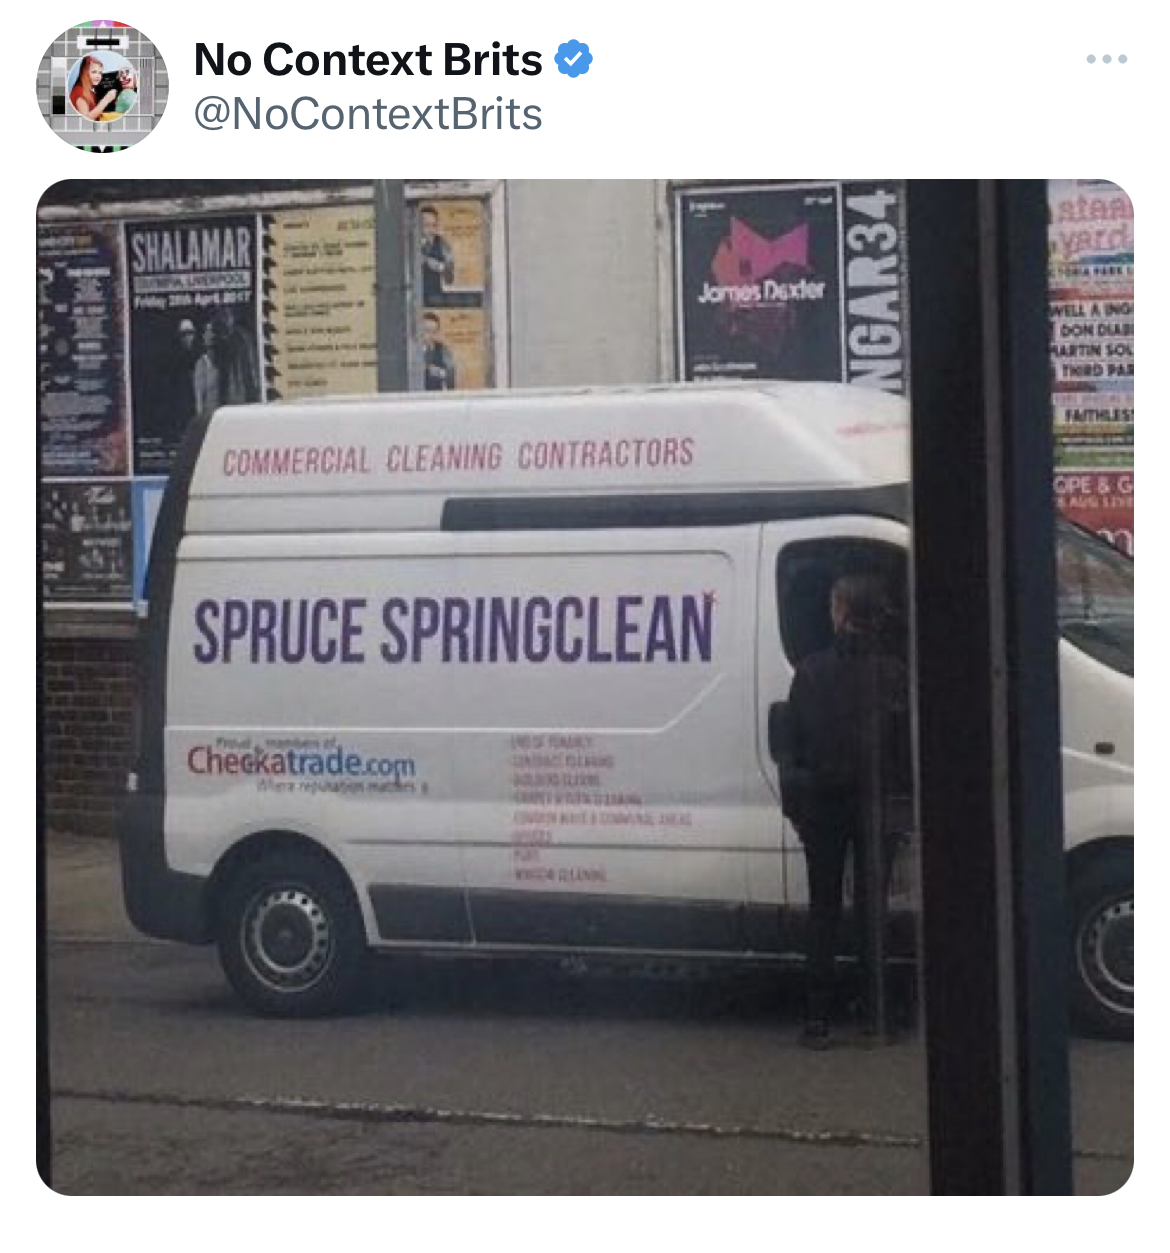 savage and absurd tweets - commercial vehicle - Long No Context Brits Shalamar Commercial Cleaning Contractors ames Dexter Spruce Springclean Cheekatrade.com NGAR34 Ster yRod Laing Don Diad Martin Son Faithless Ope & G Laus 11